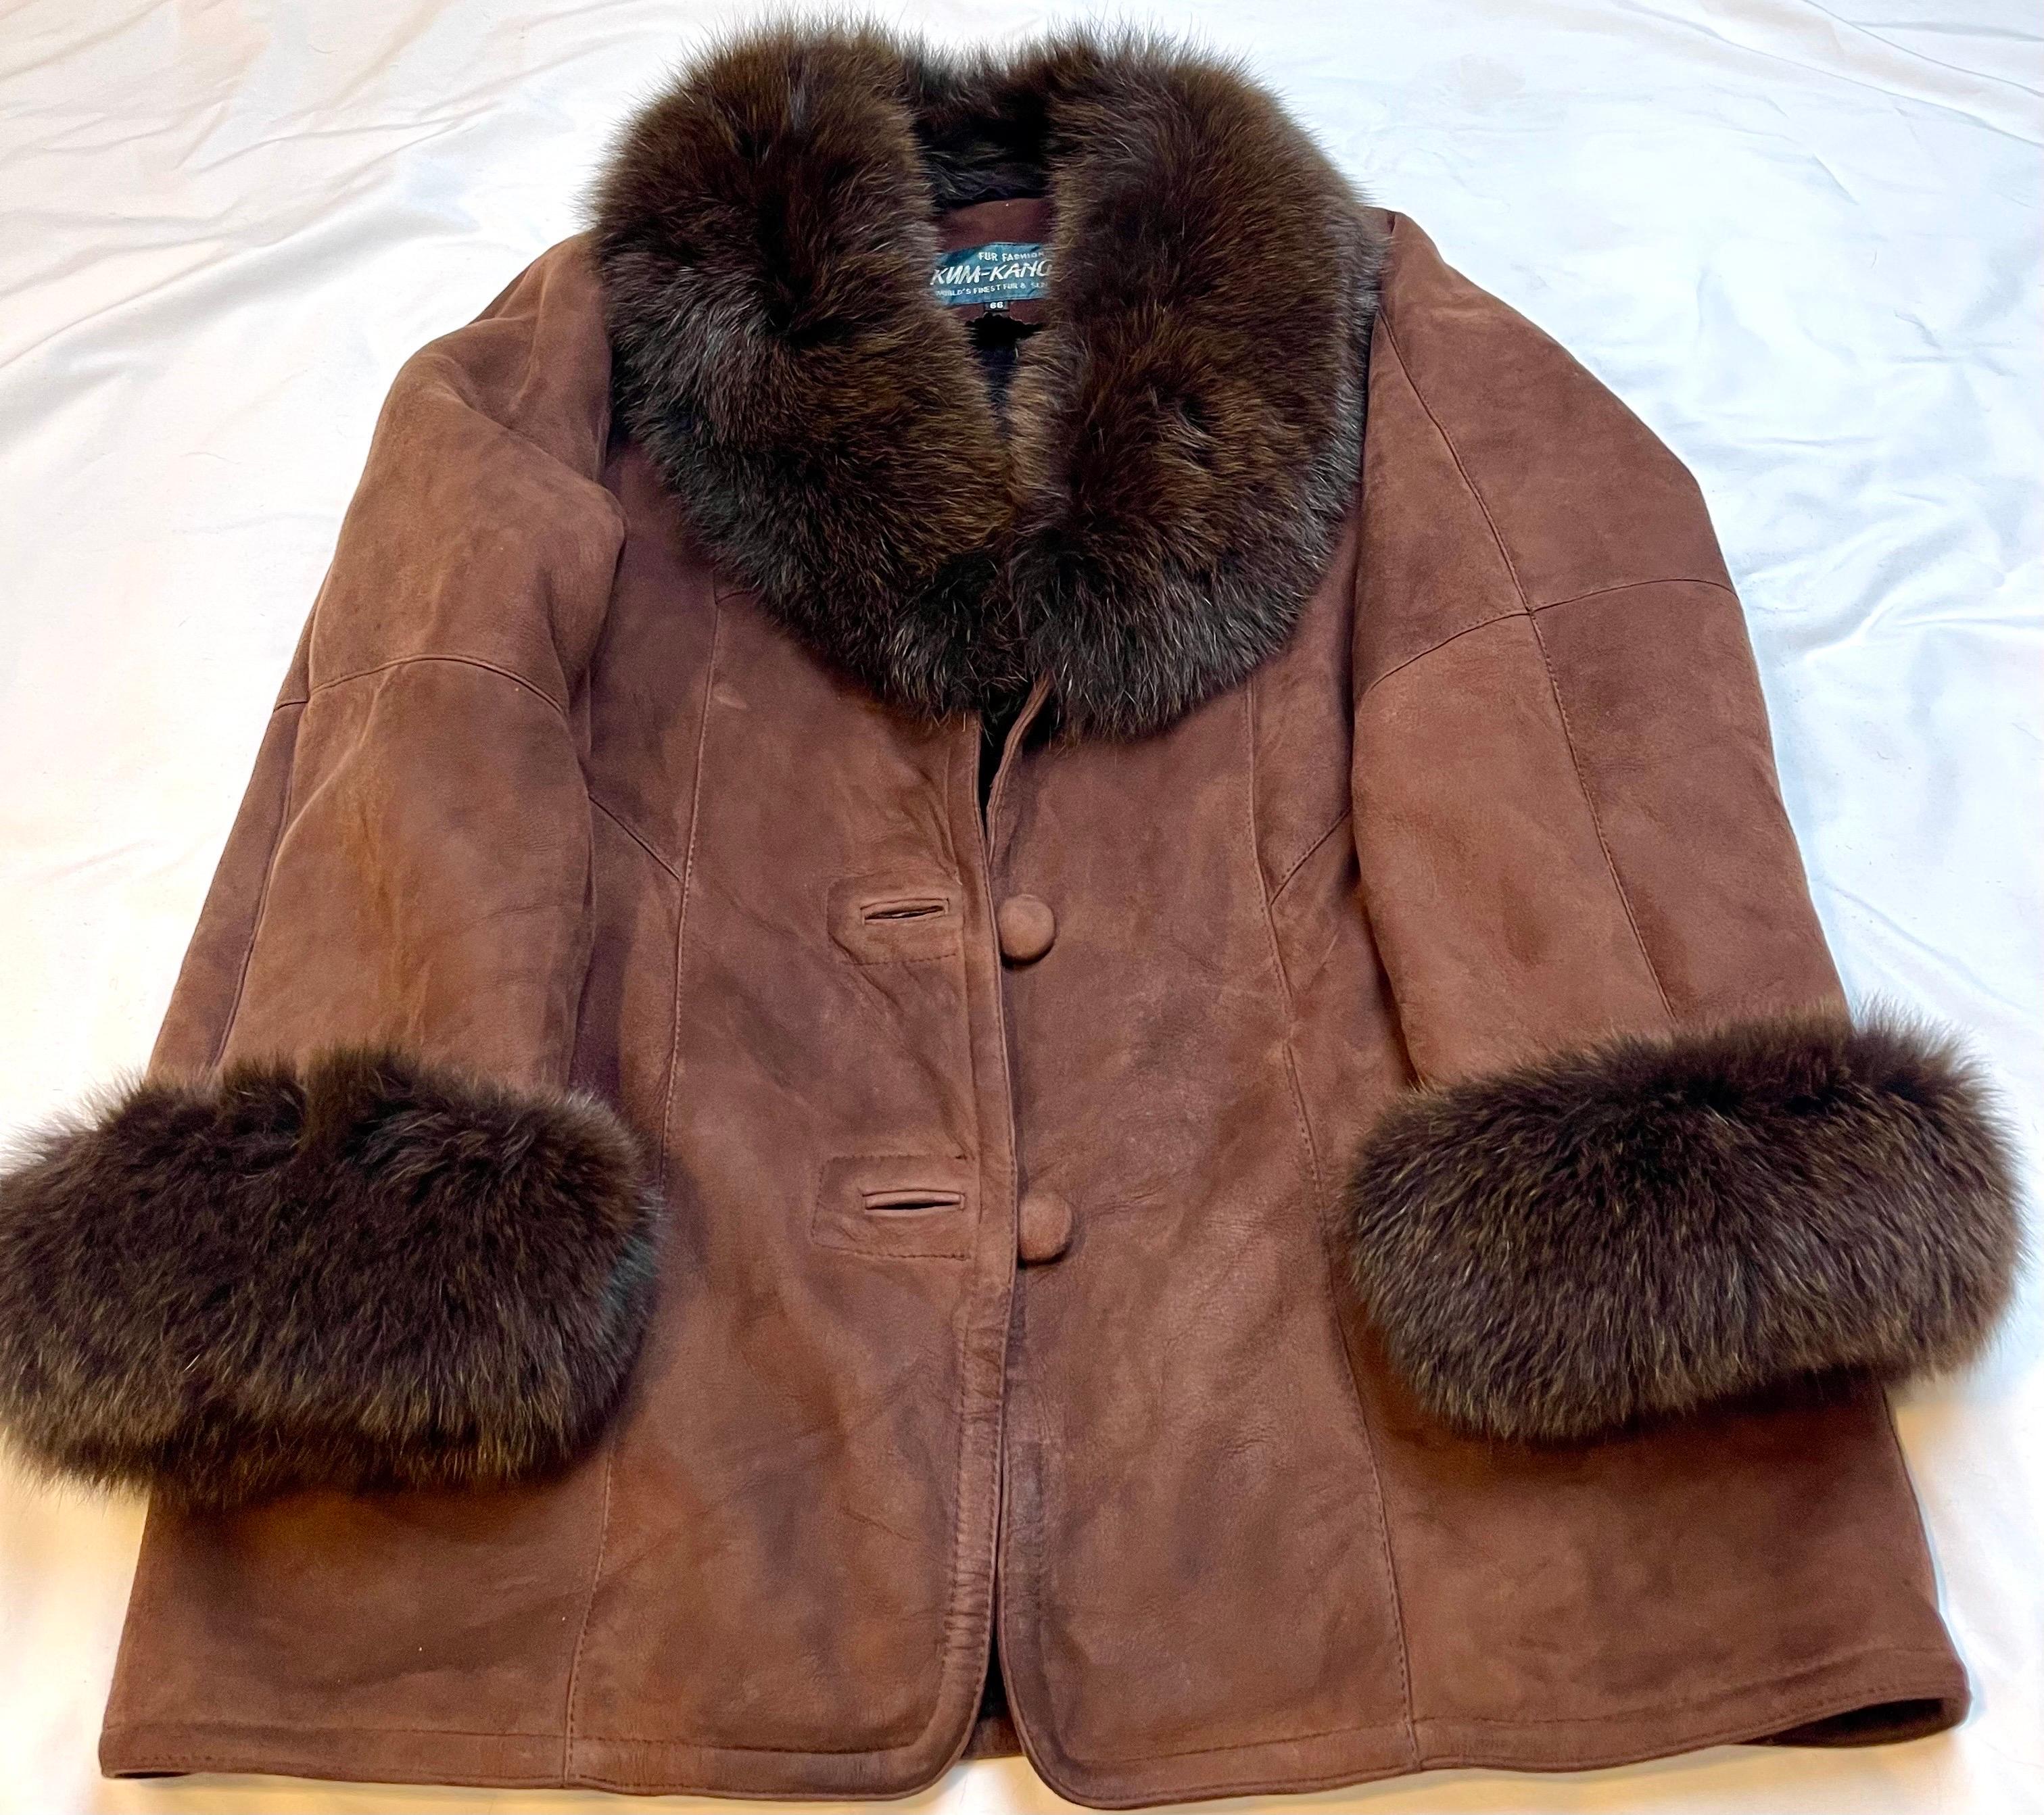   High Country Shearling Sheepskin Coat excellent Condition Real Fur Brown Color 2